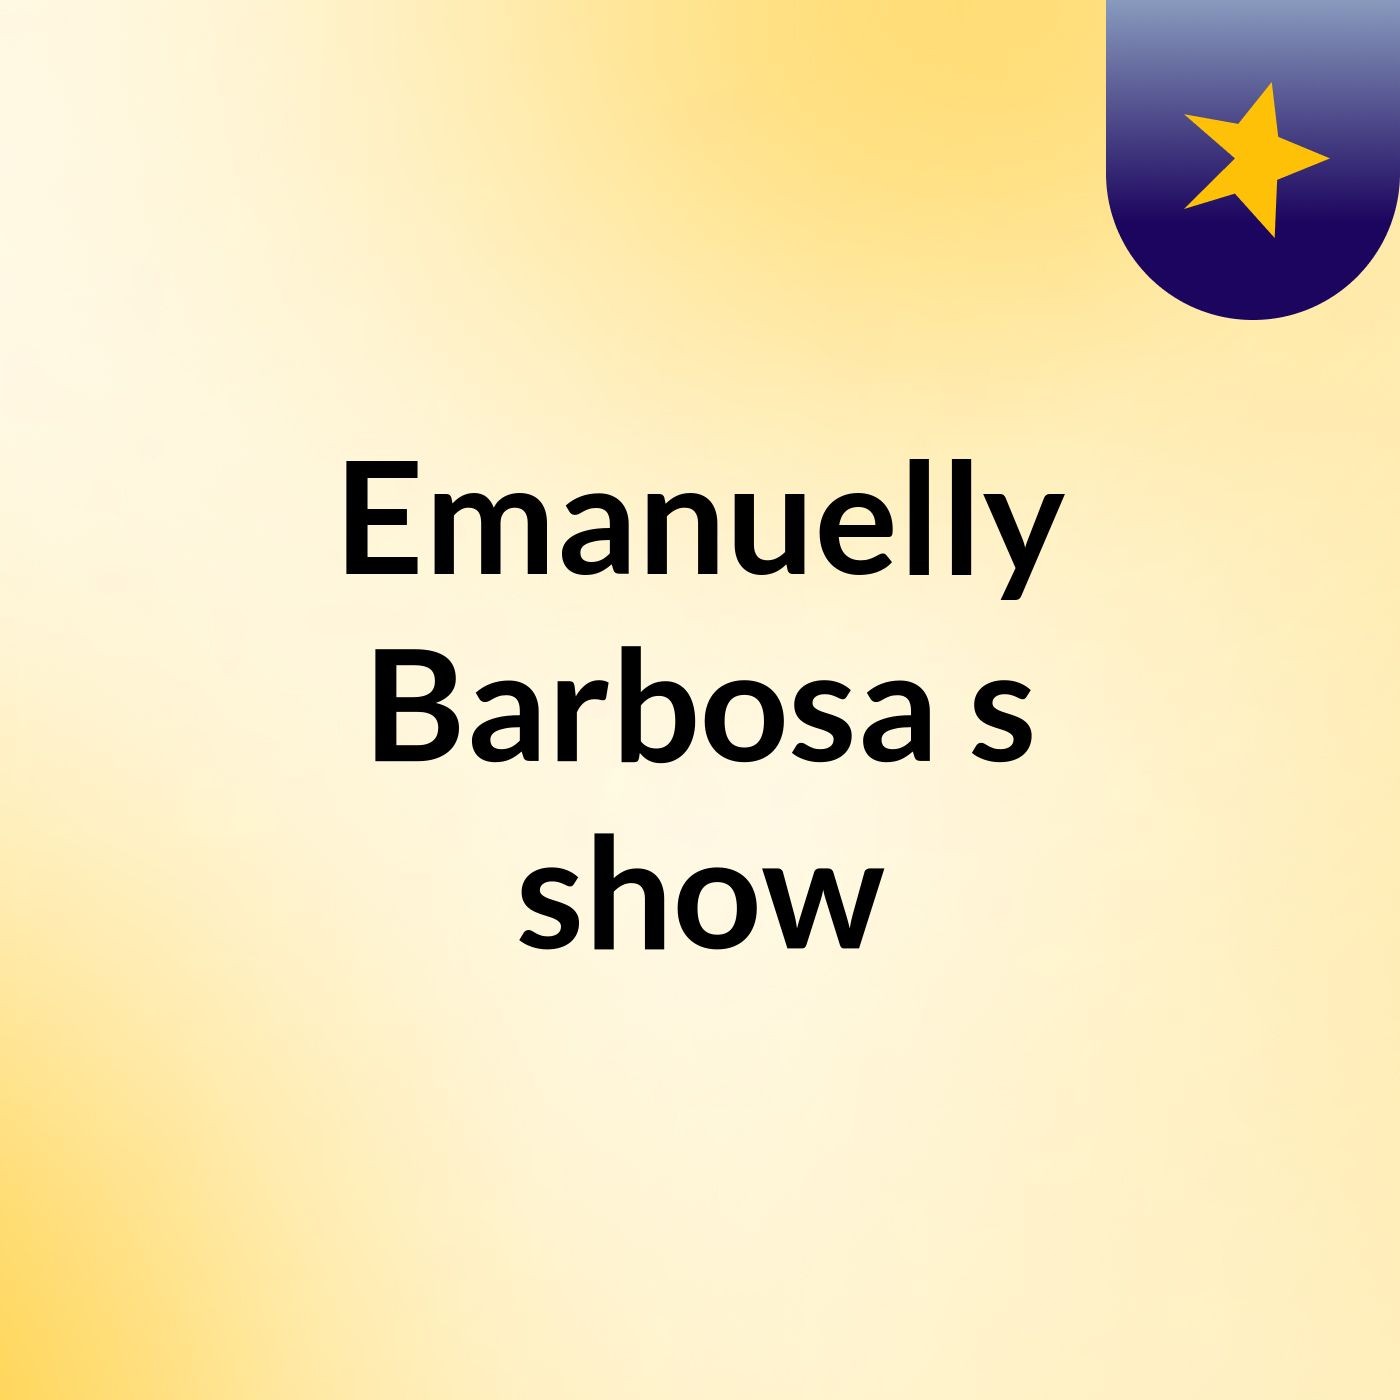 Emanuelly Barbosa's show